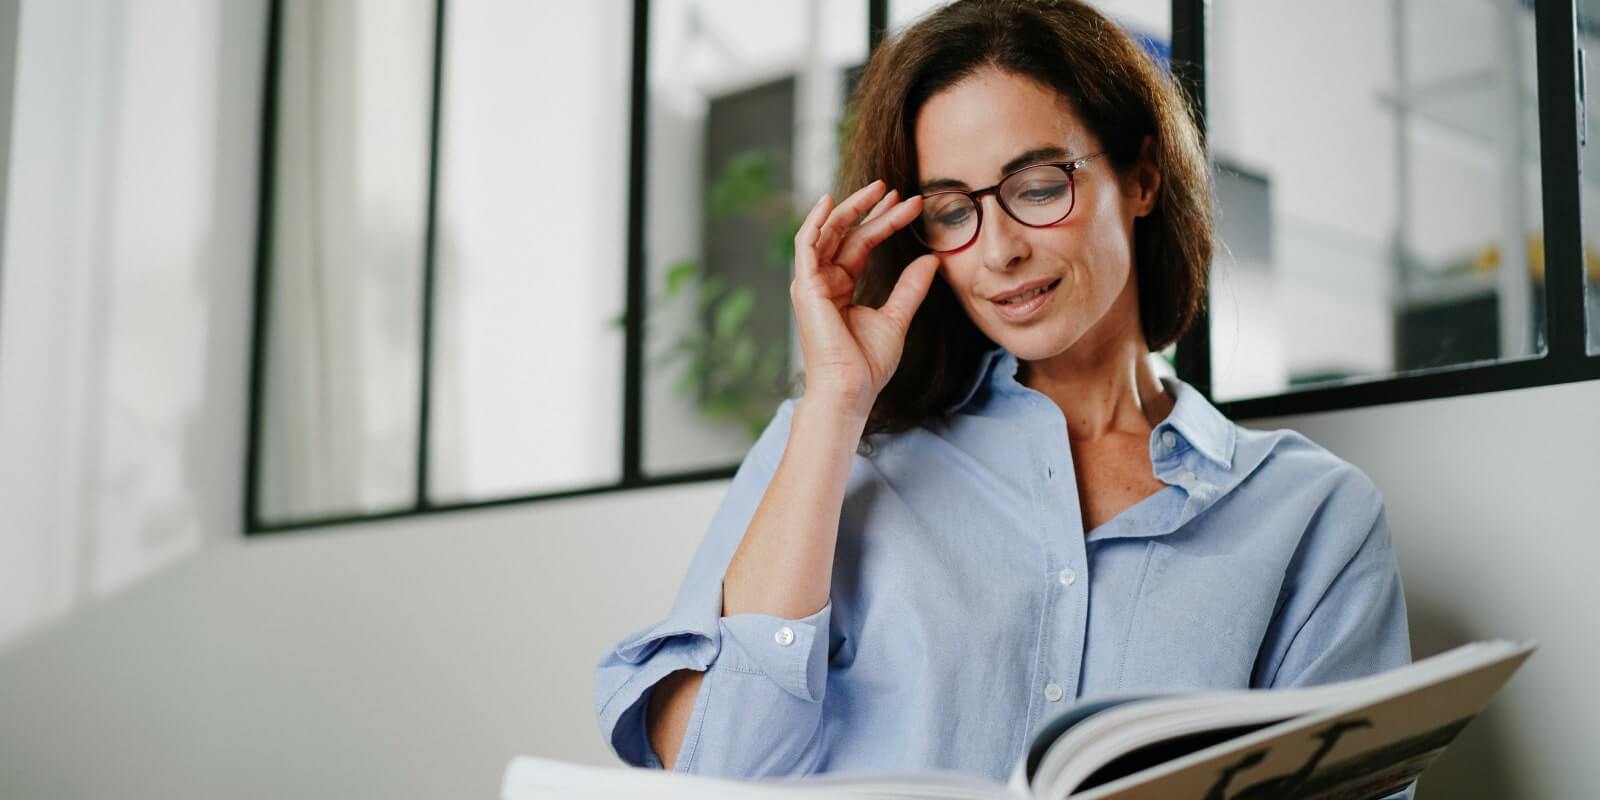 Pair of Nooz Optics reading glasses driven by a woman reading